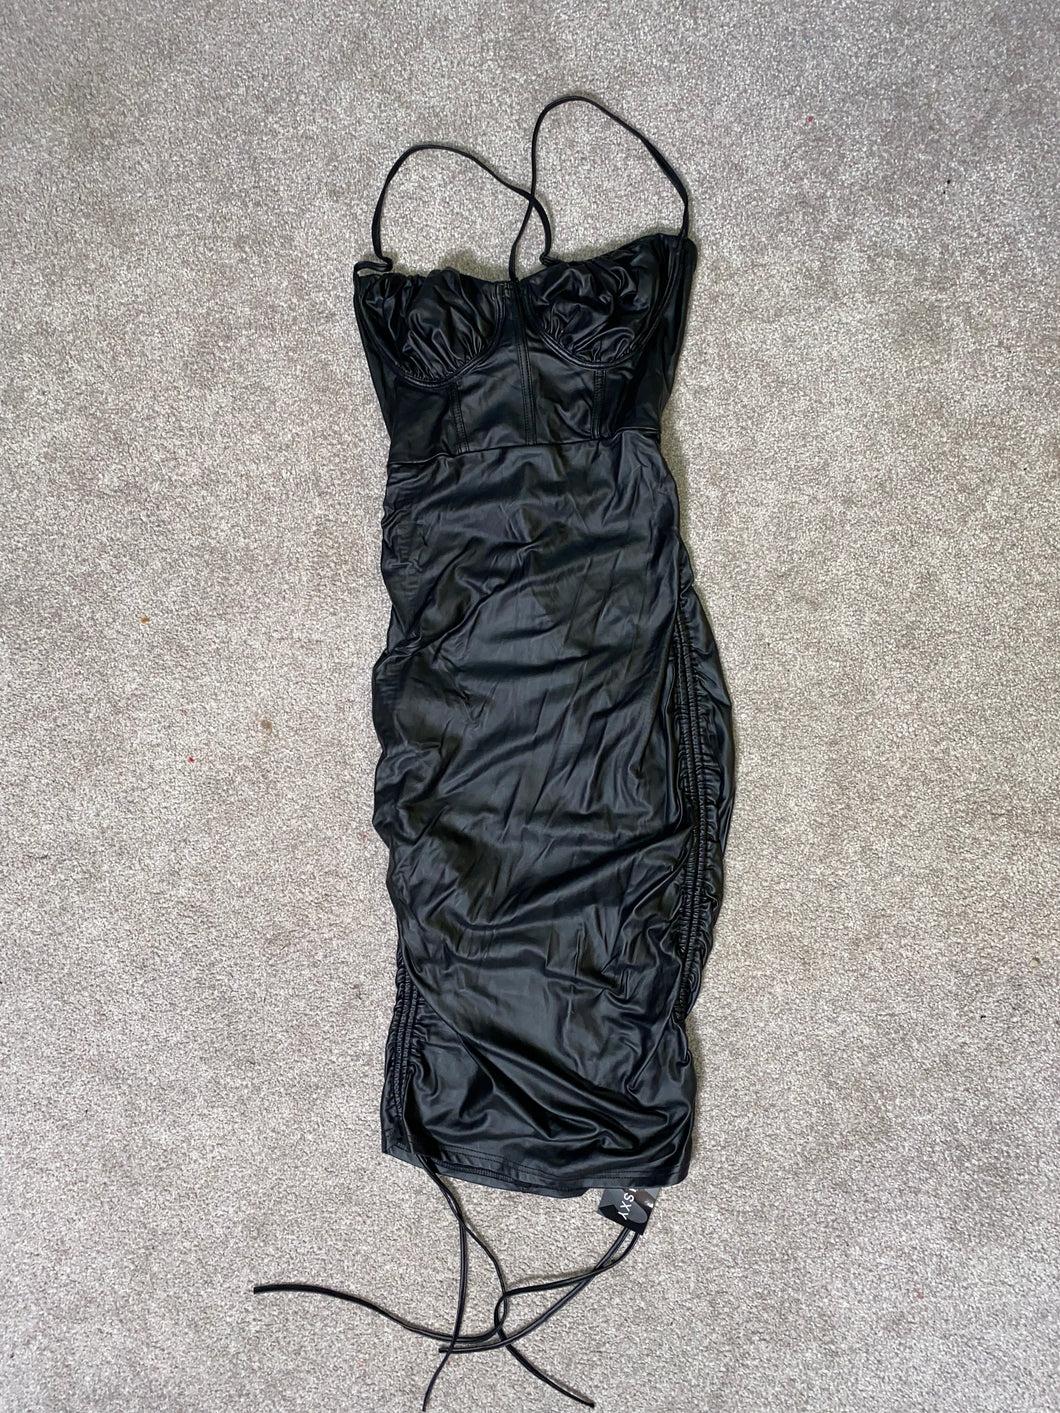 Long Leather Dress from SHEIN - Small - Never Worn/Tags Still On